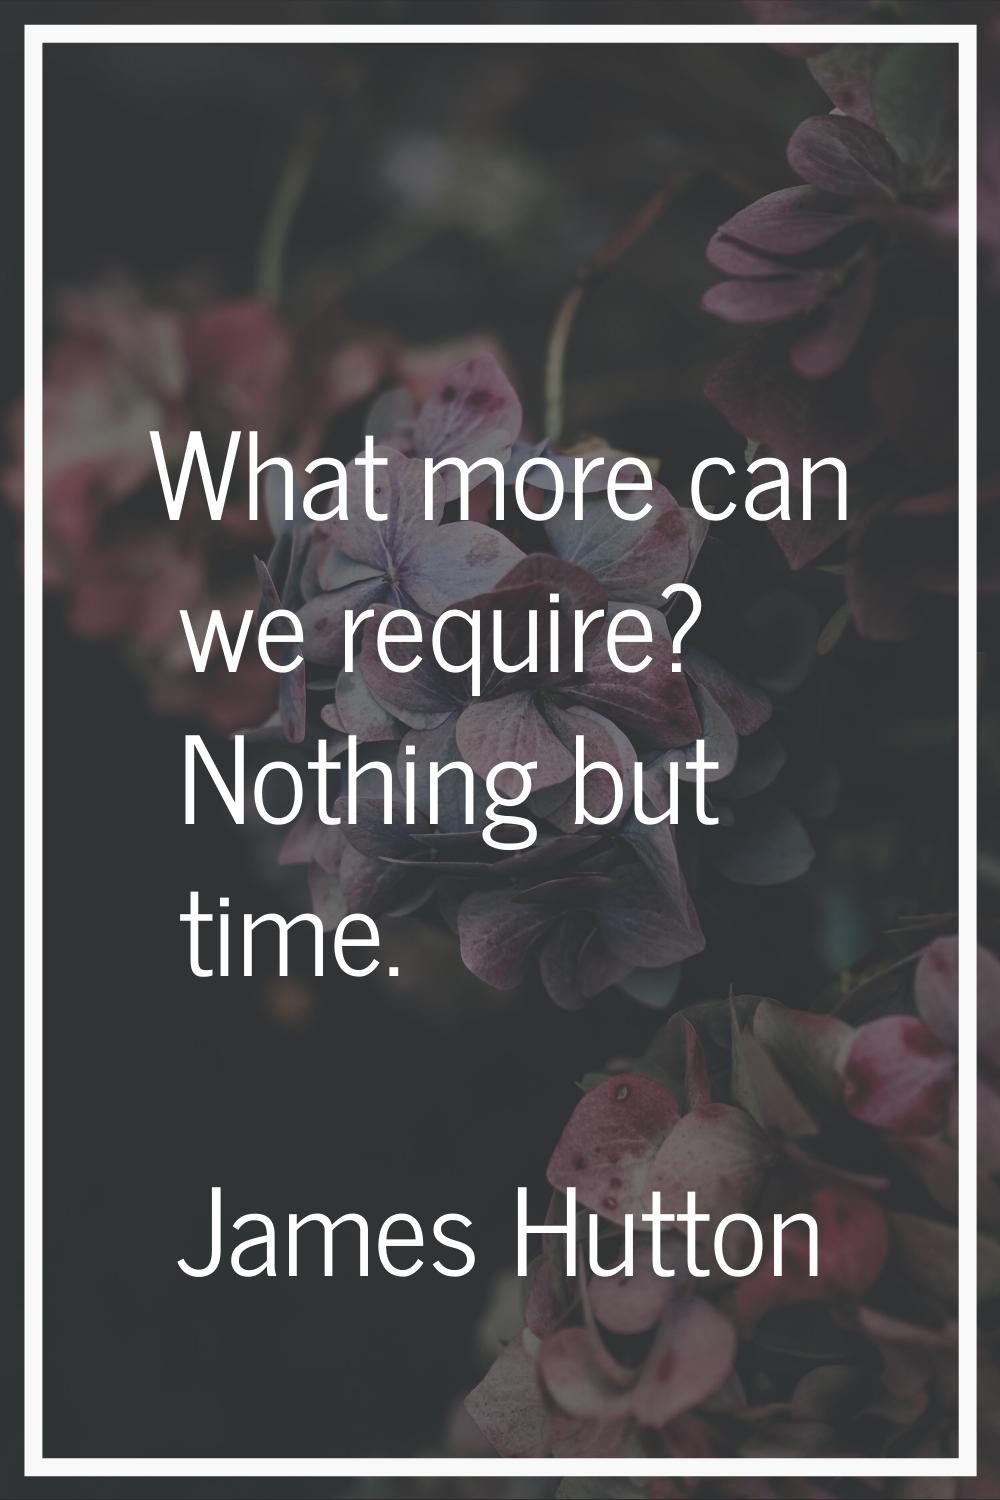 What more can we require? Nothing but time.